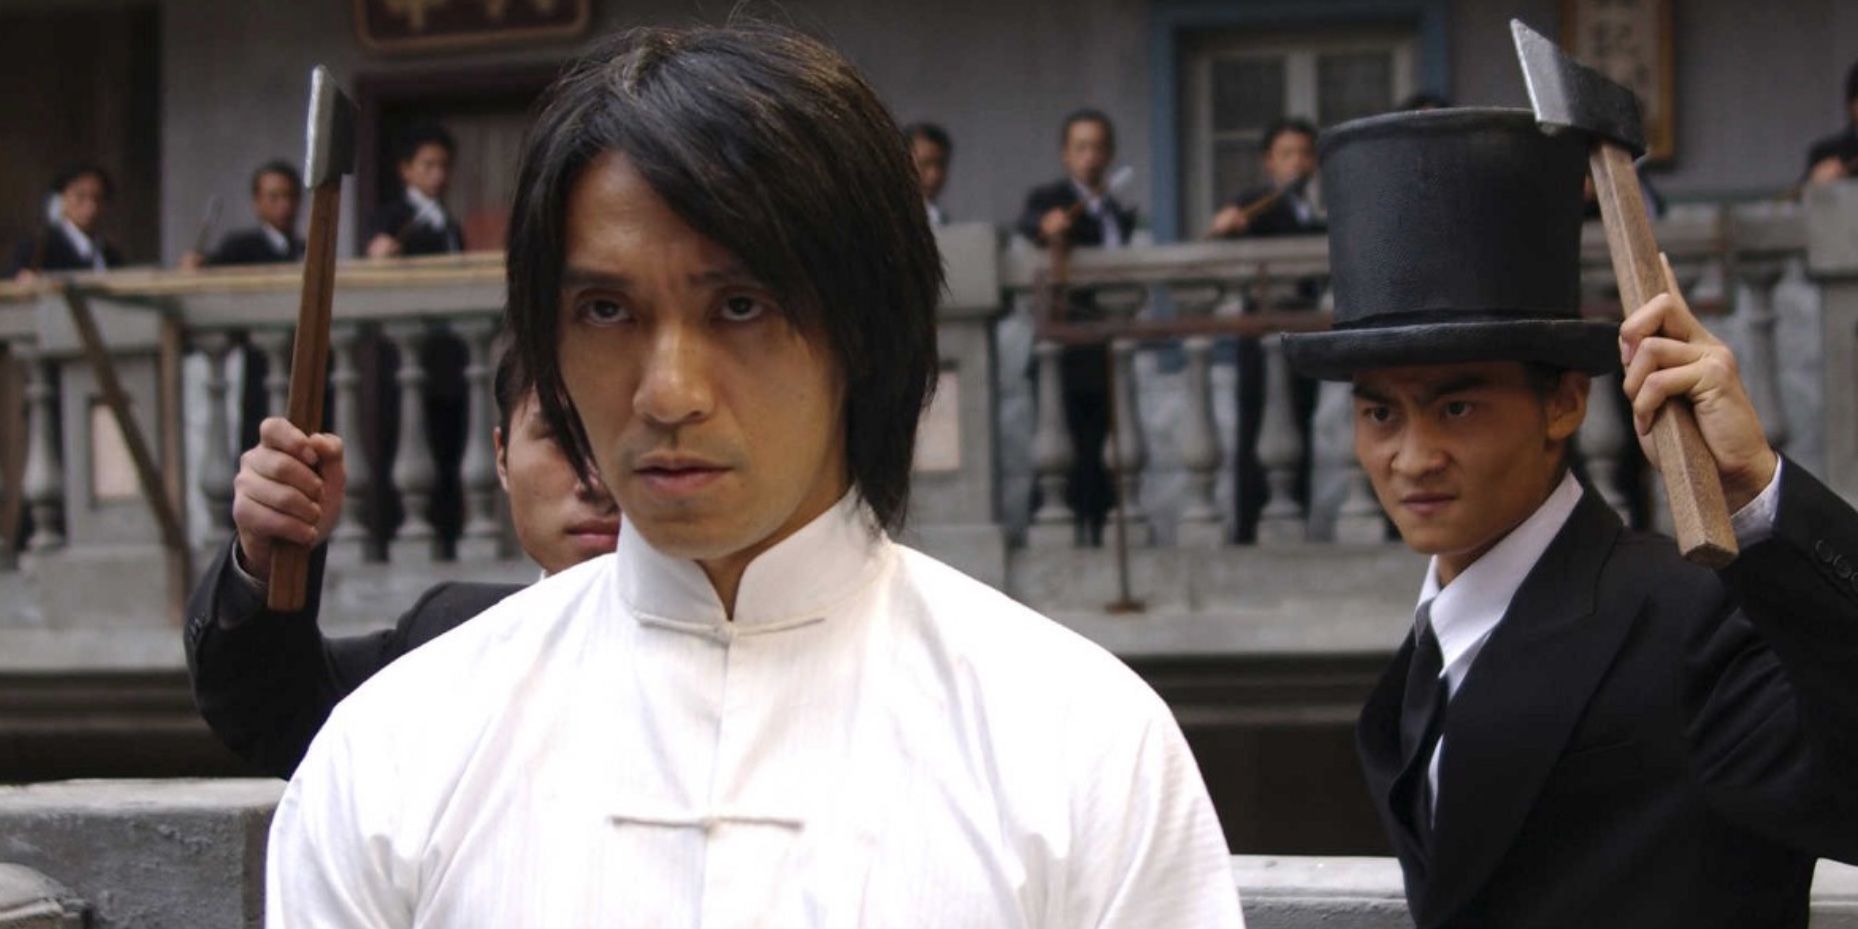 Stephen Chow and two other men standing behind him with axes in Kung Fu Hustle